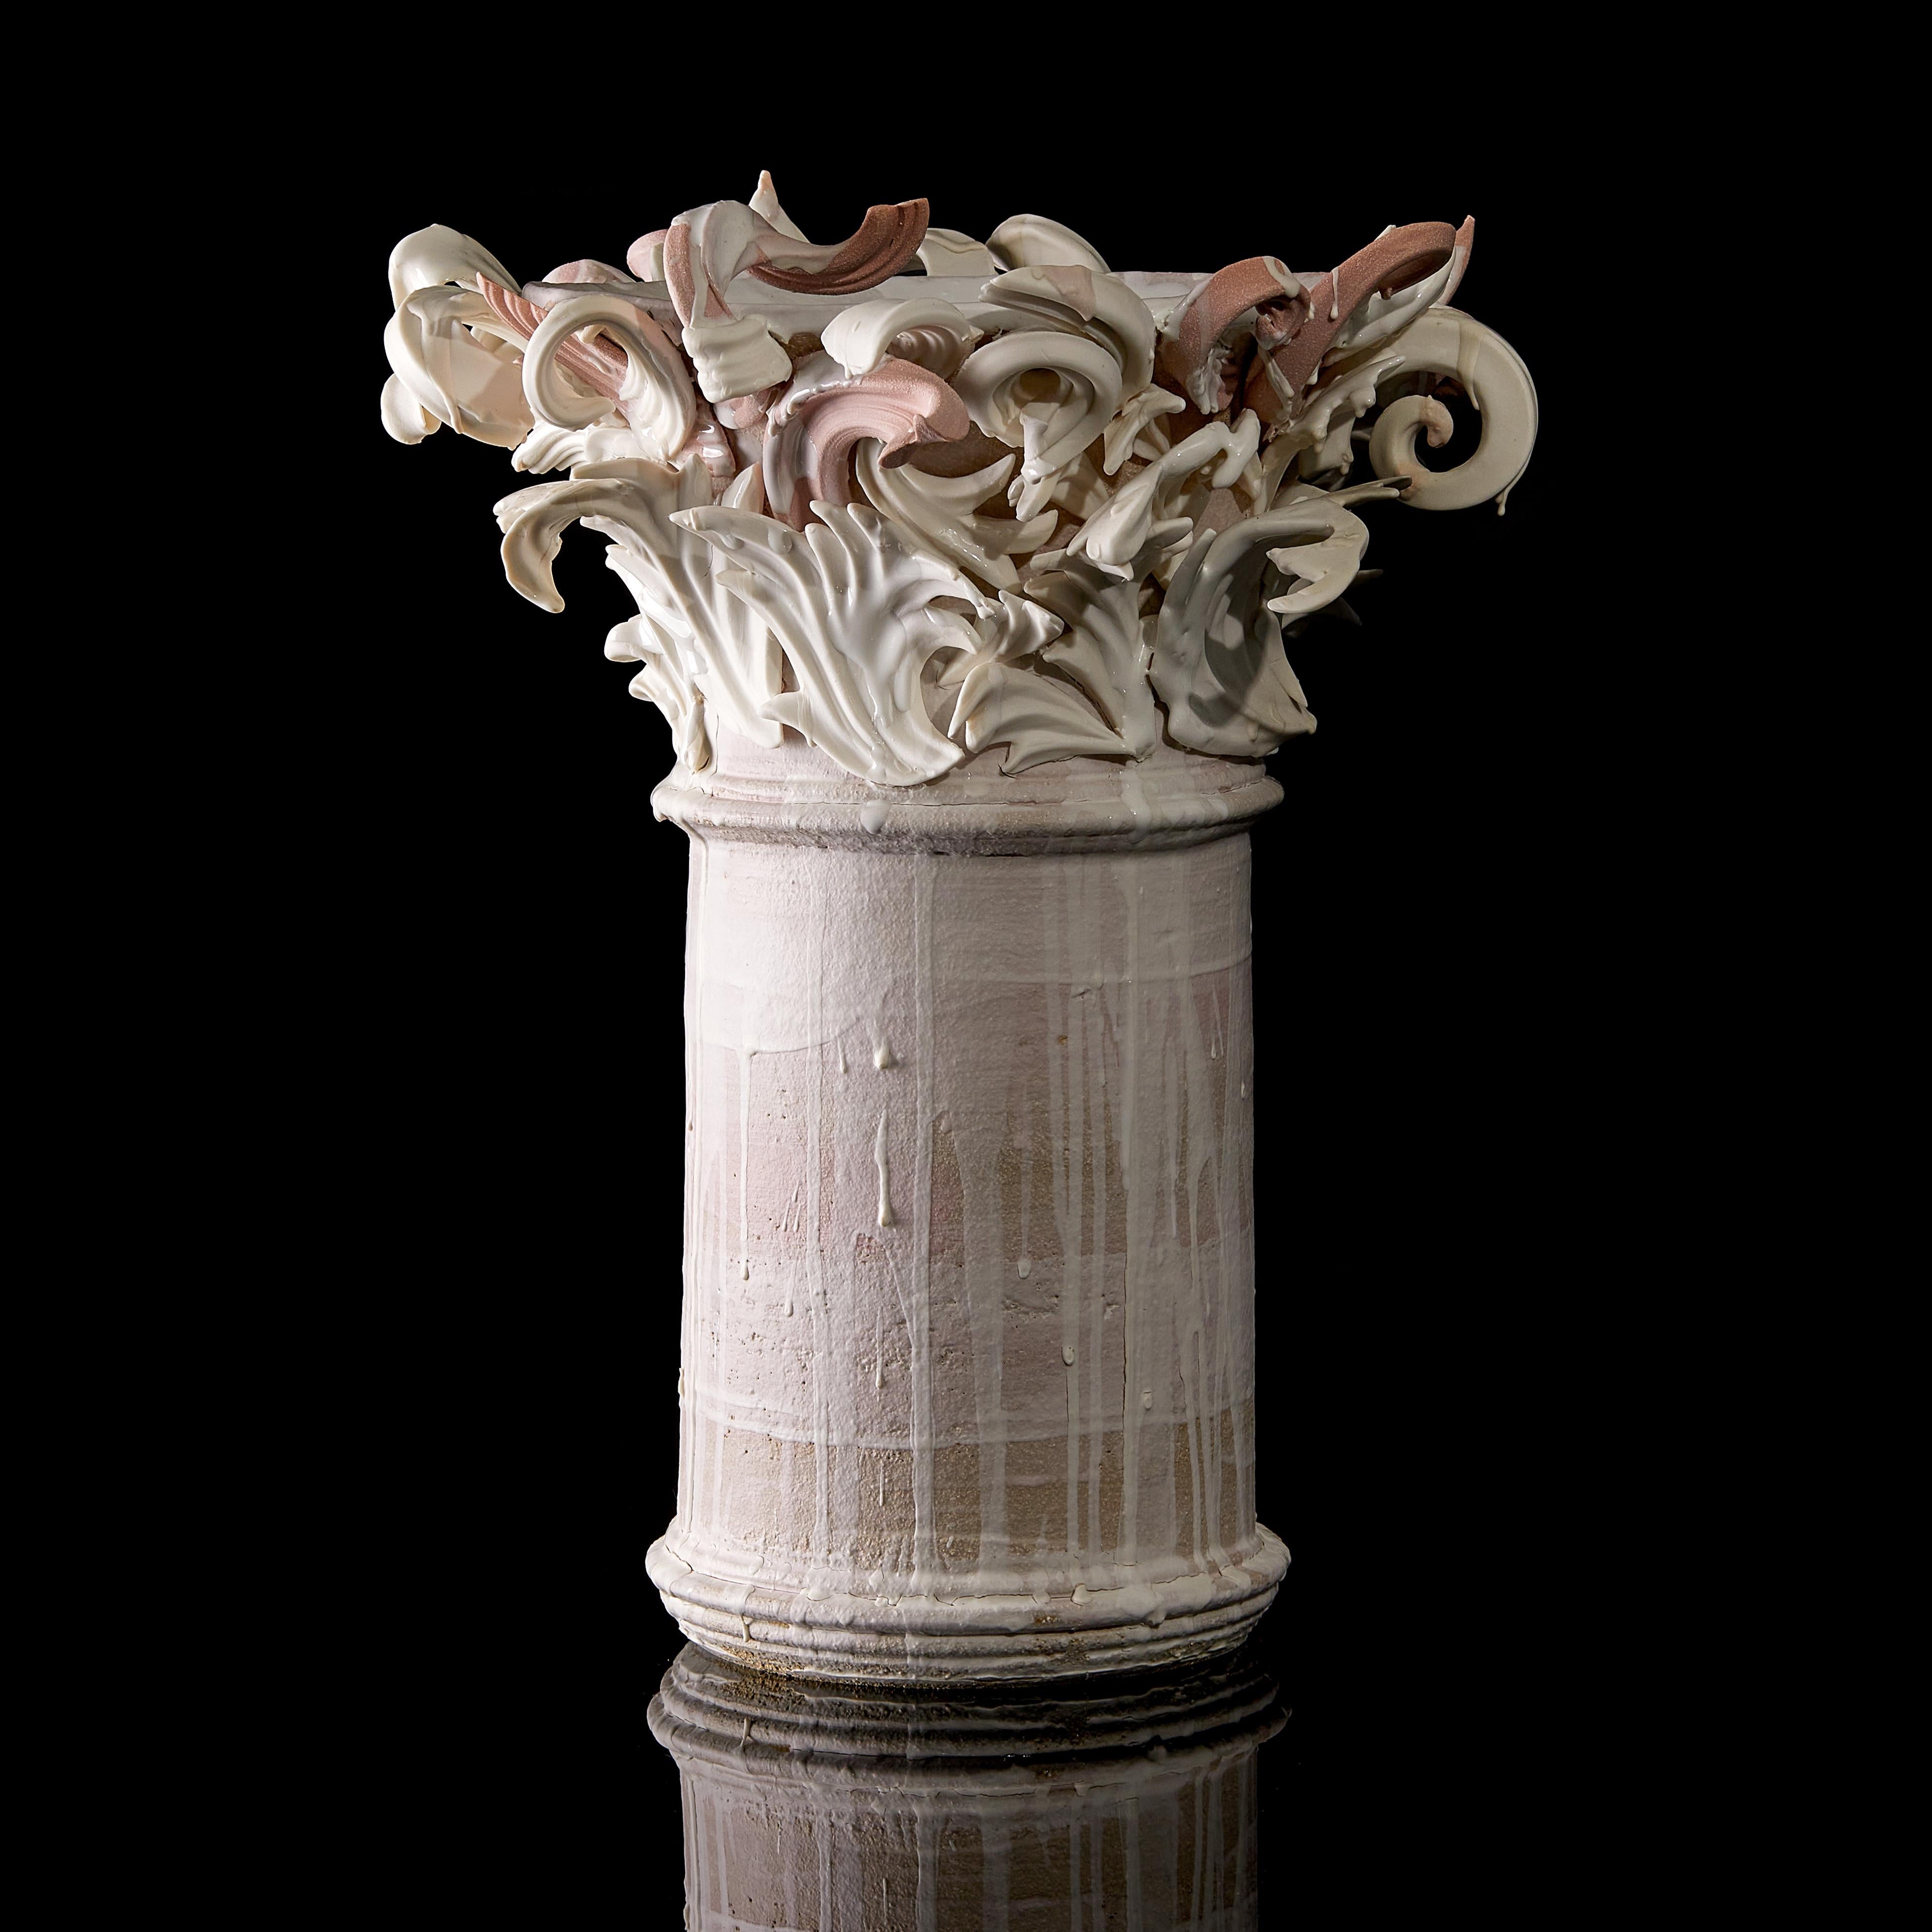 Contemporary Colonnade III, a Unique Ceramic Sculptural Vase in Pink & White by Jo Taylor